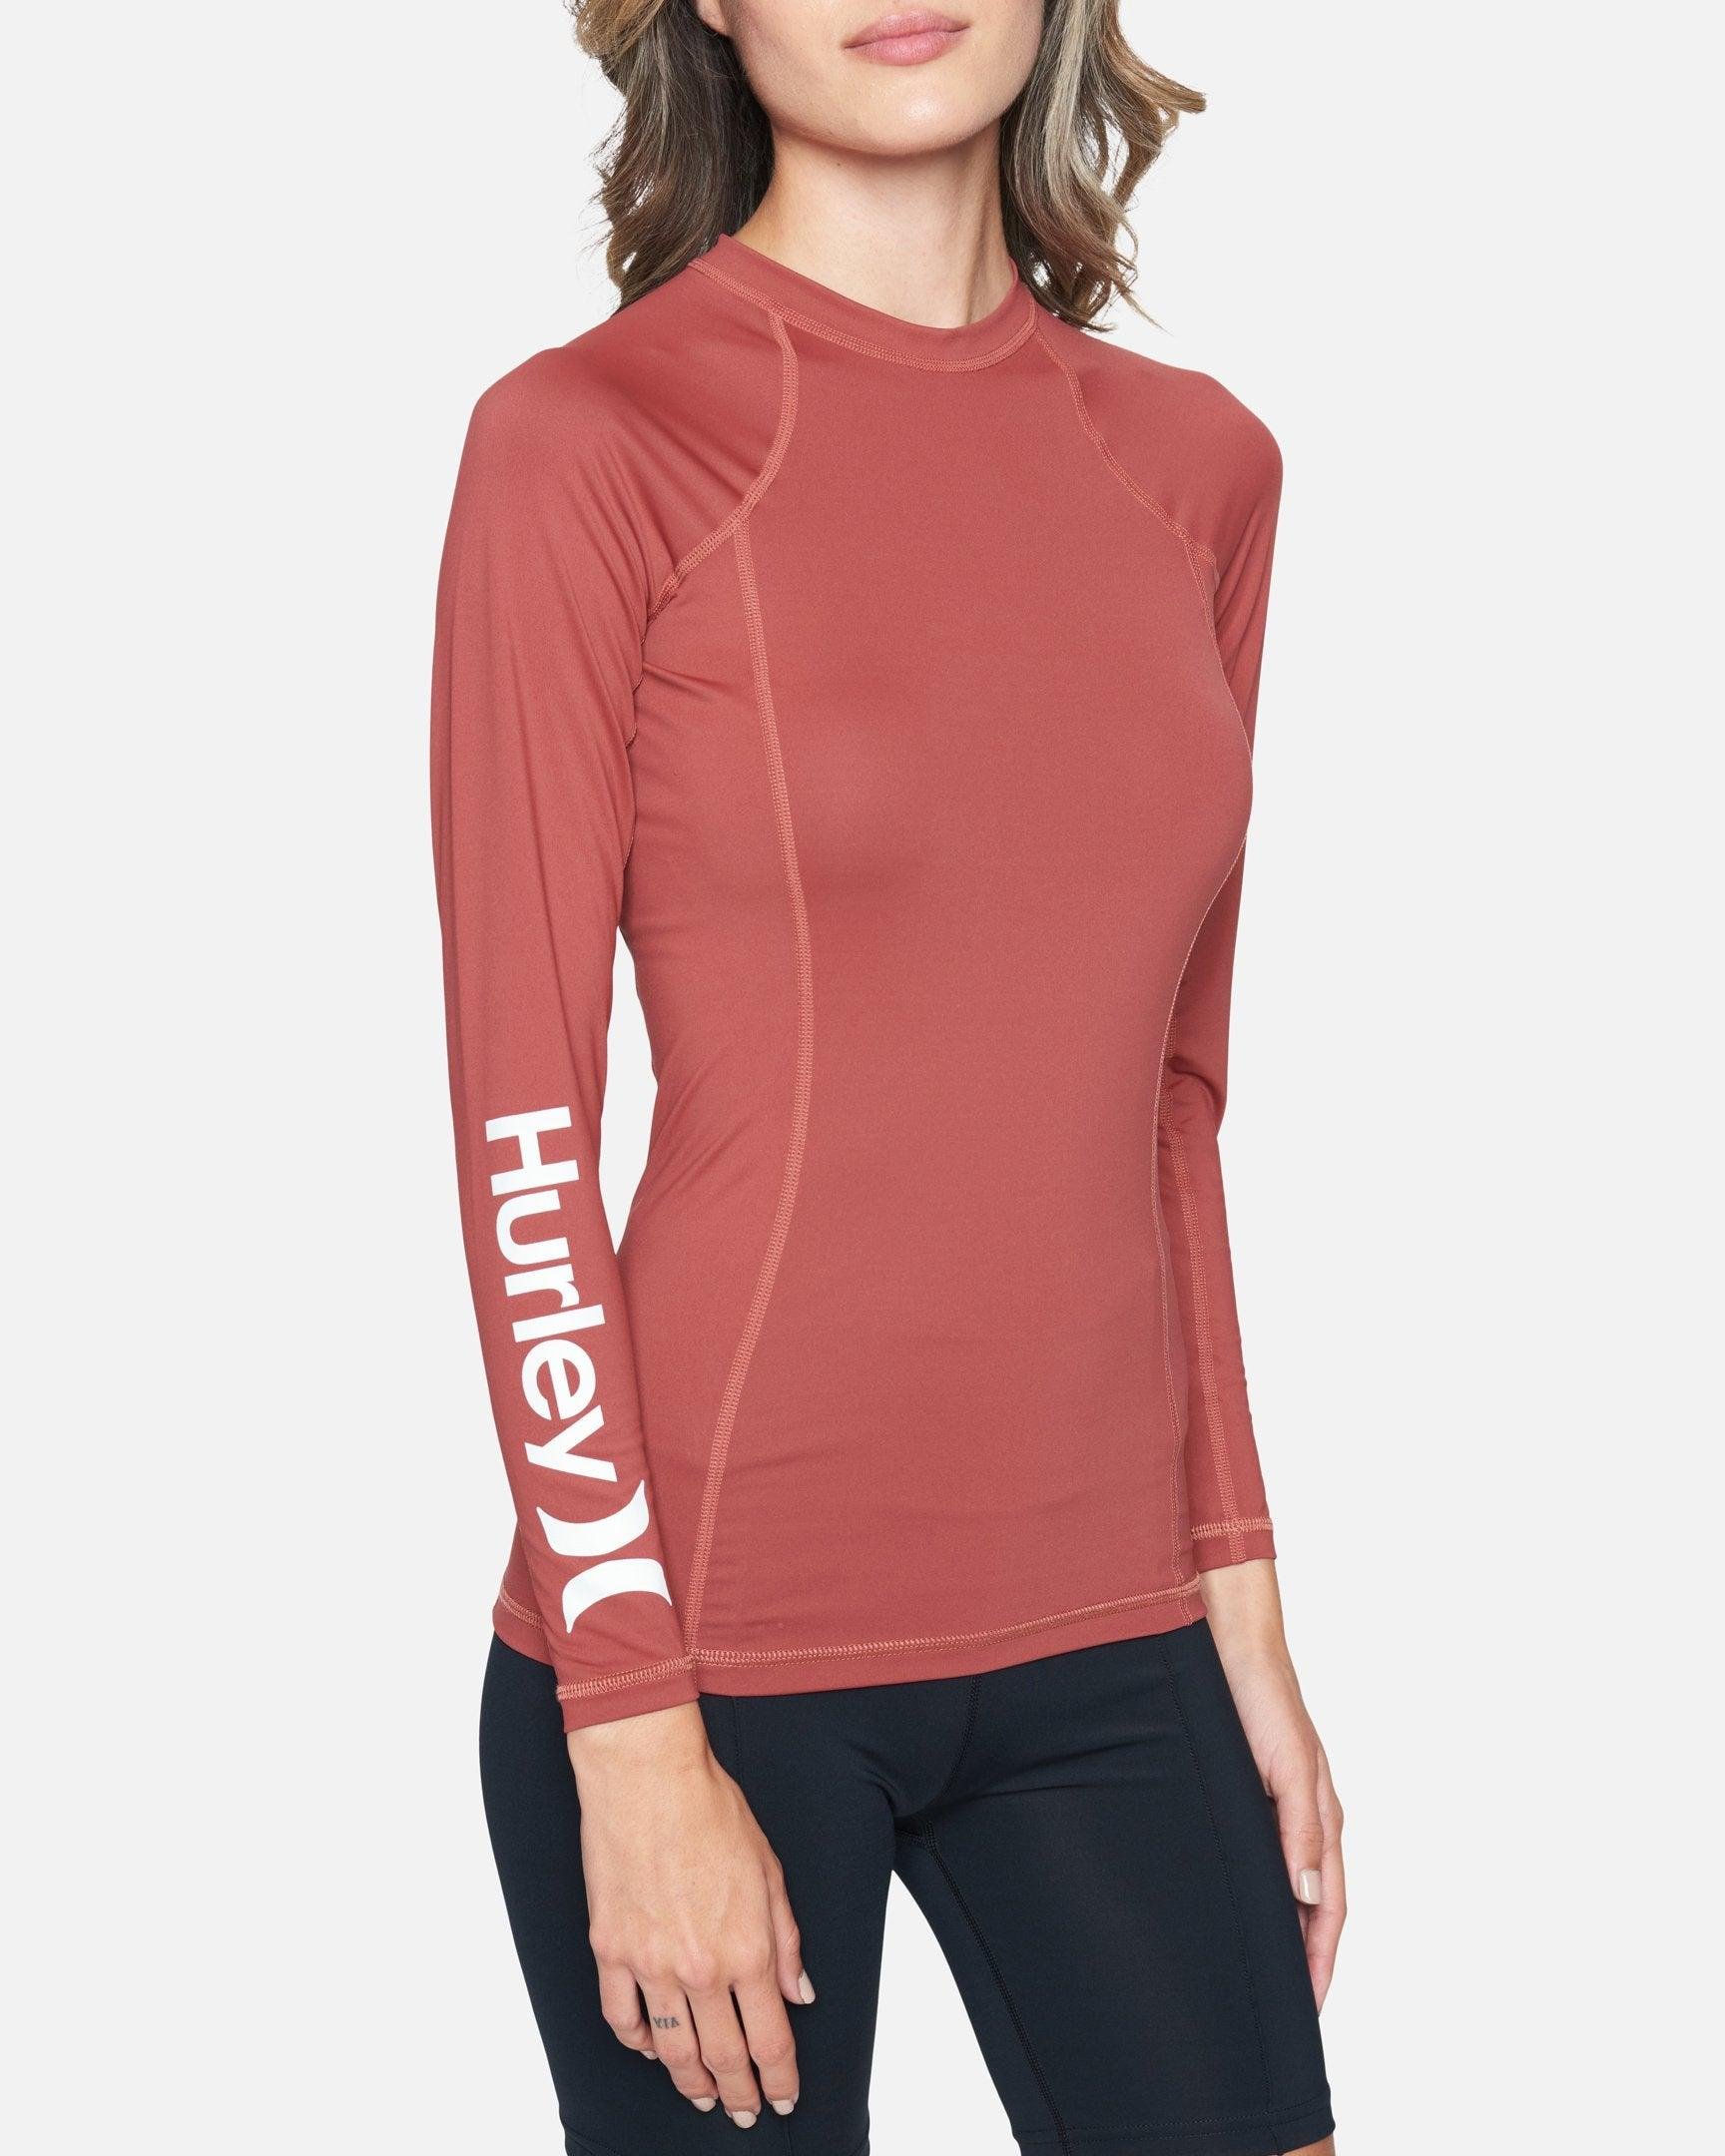 Women's Women's One And Only Sun Protection Rashguard by HURLEY